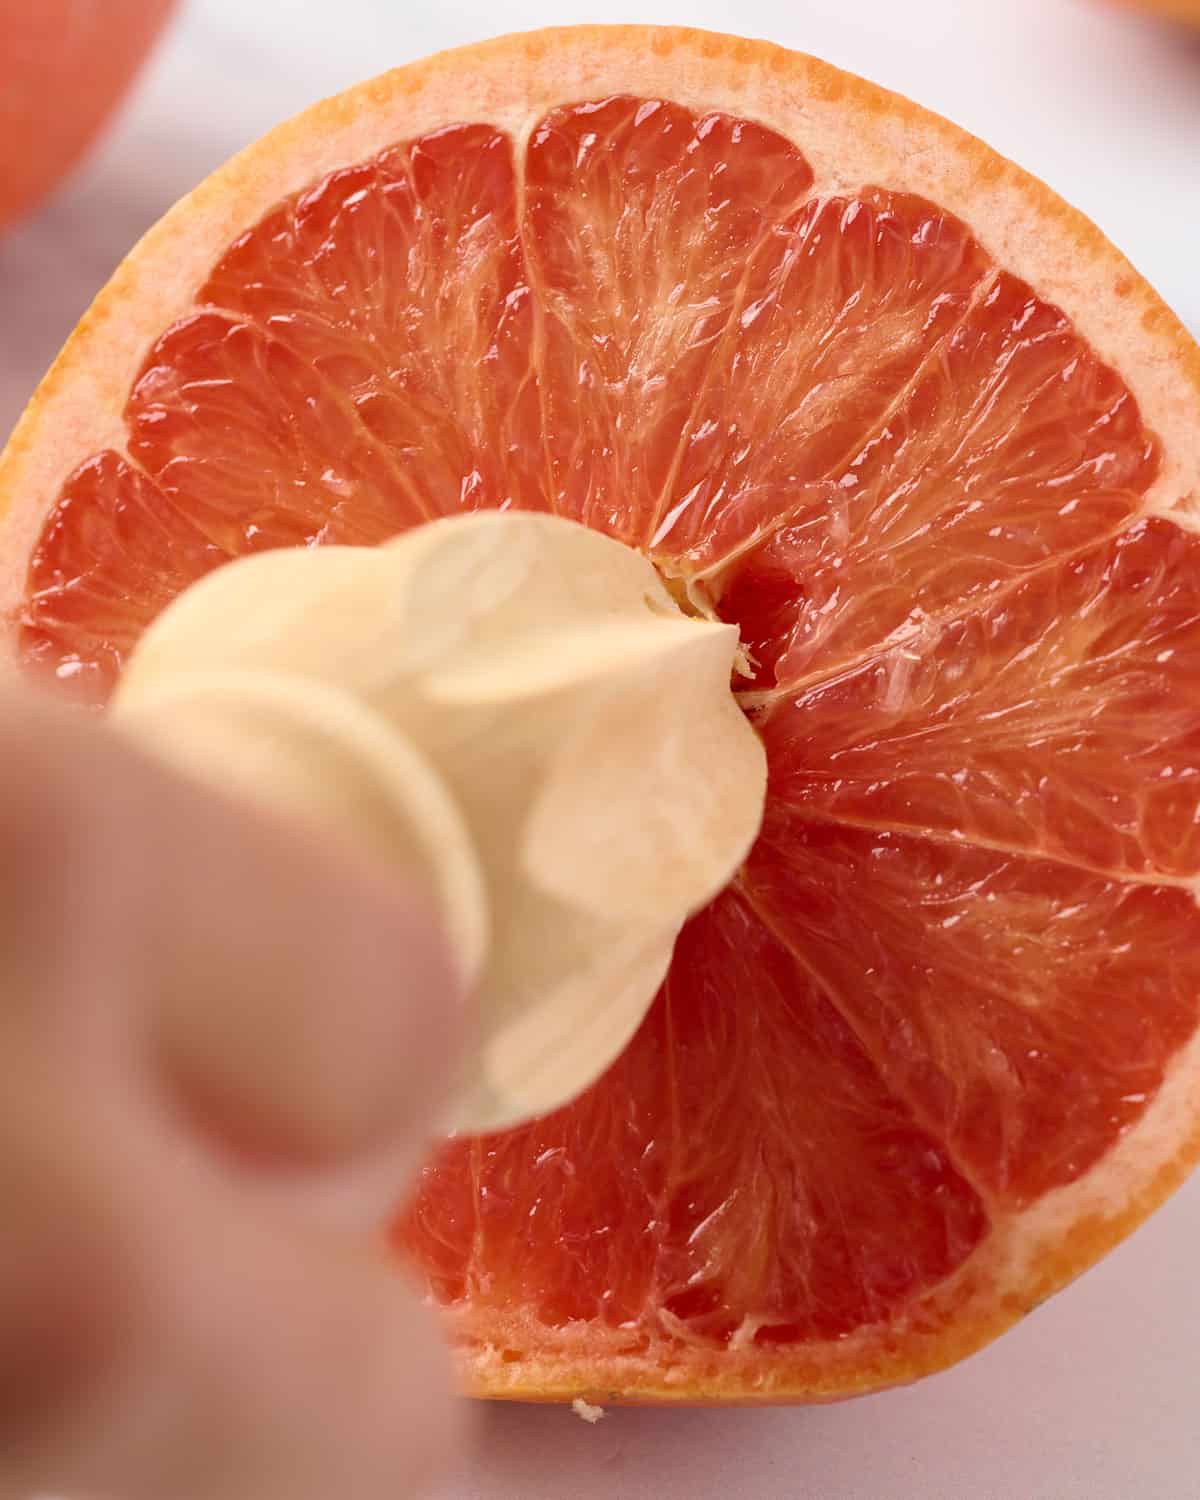 Using a citrus reamer to make freshly squeezed grapefruit juice.